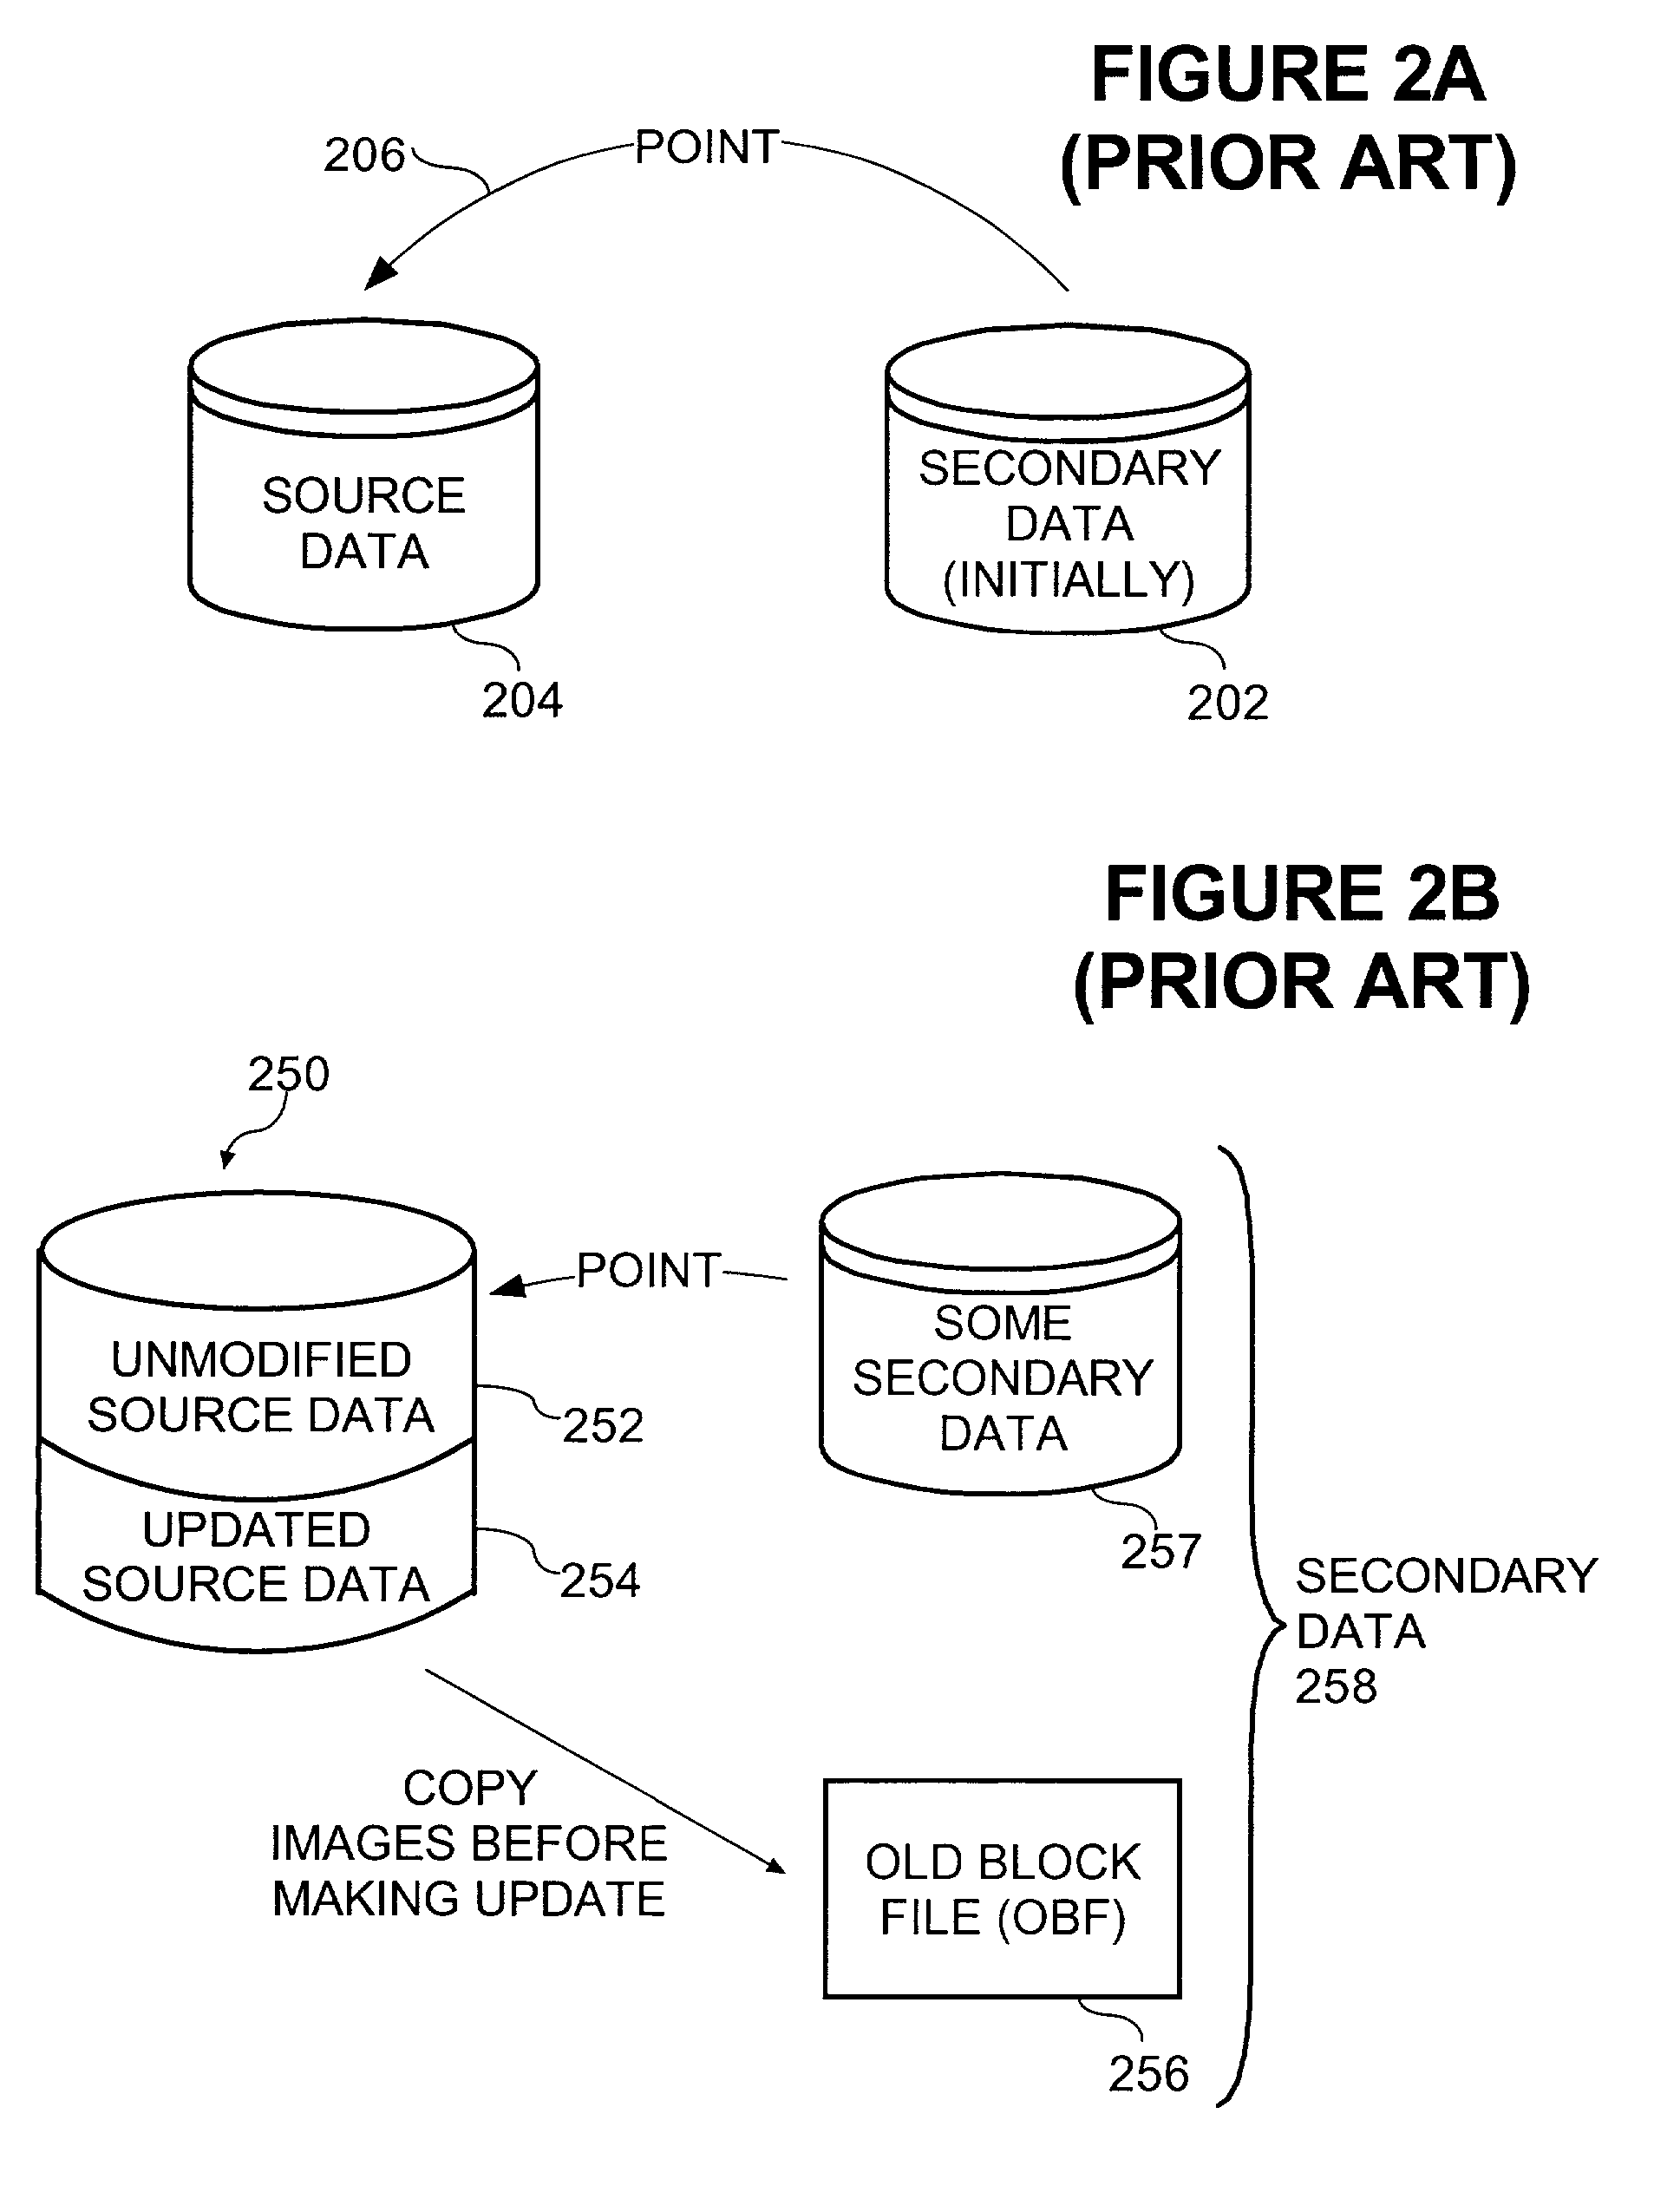 Copy method supplementing outboard data copy with previously instituted copy-on-write logical snapshot to create duplicate consistent with source data as of designated time